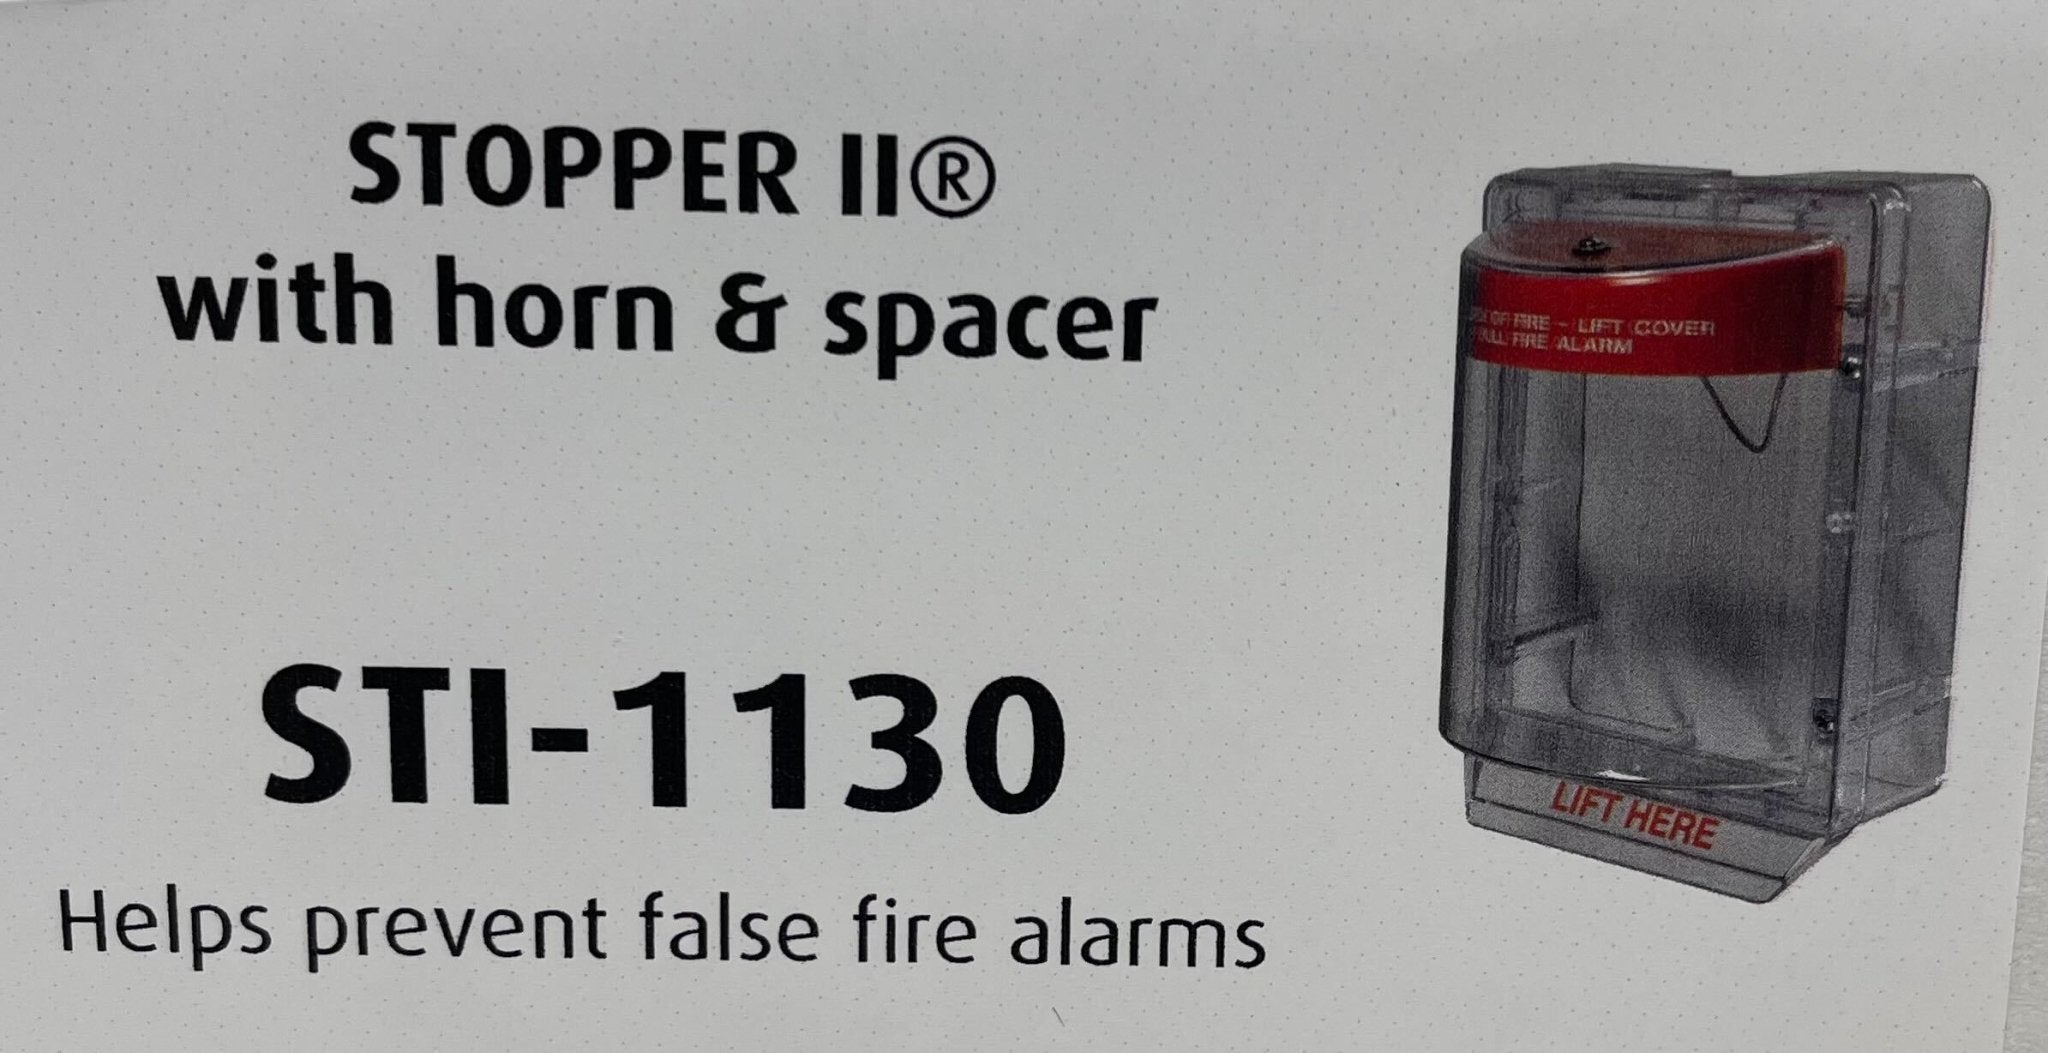 STI-1130 Stopper II with Horn and Clear Spacer, Fire Label - The Fire Alarm Supplier